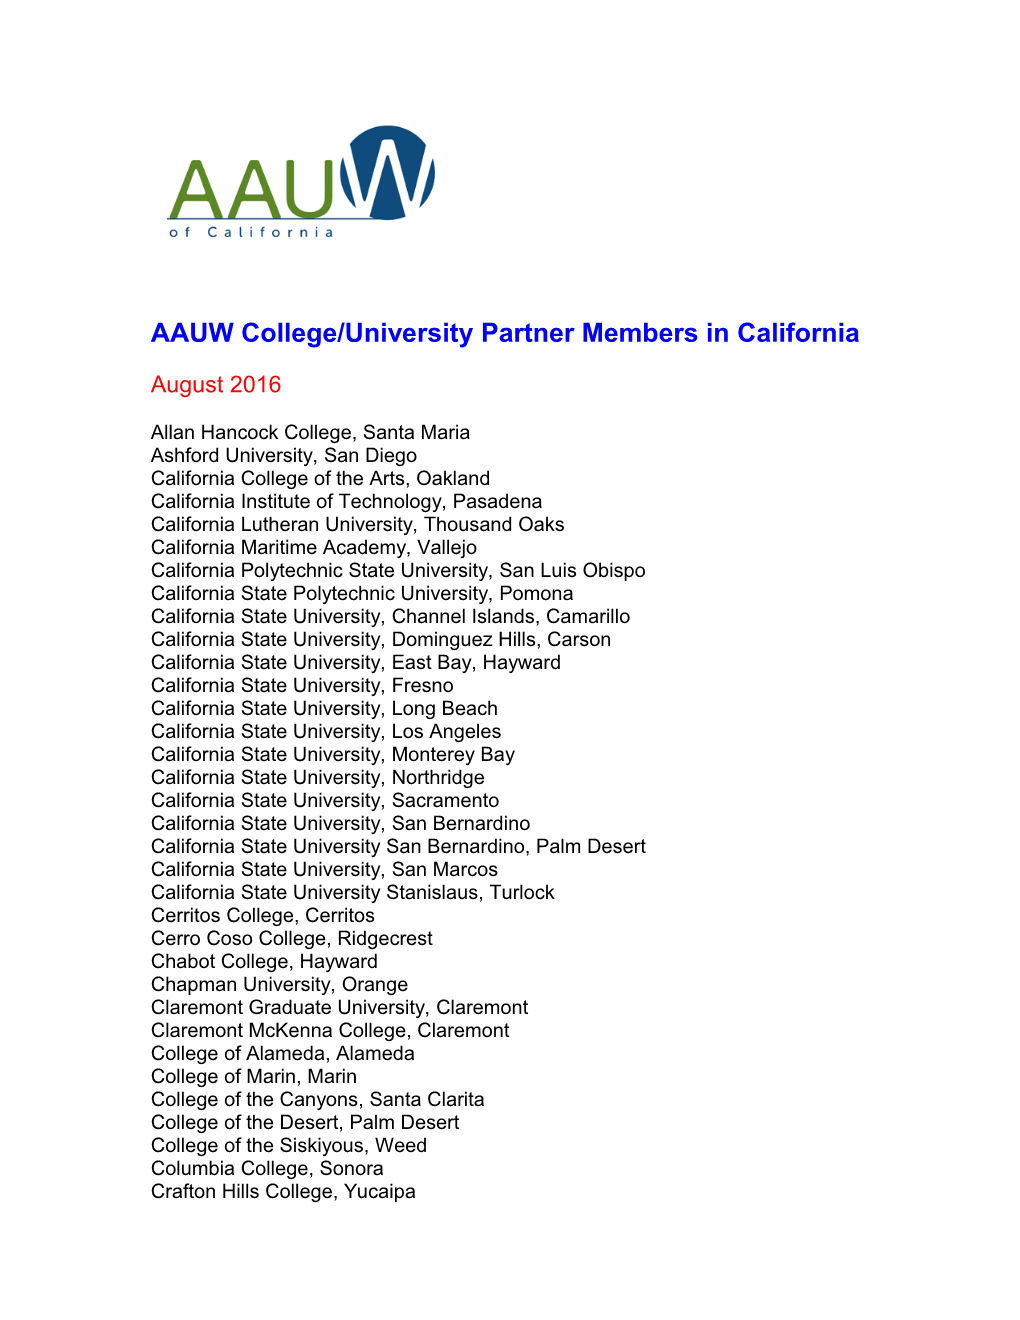 AAUW College and University Partners in California